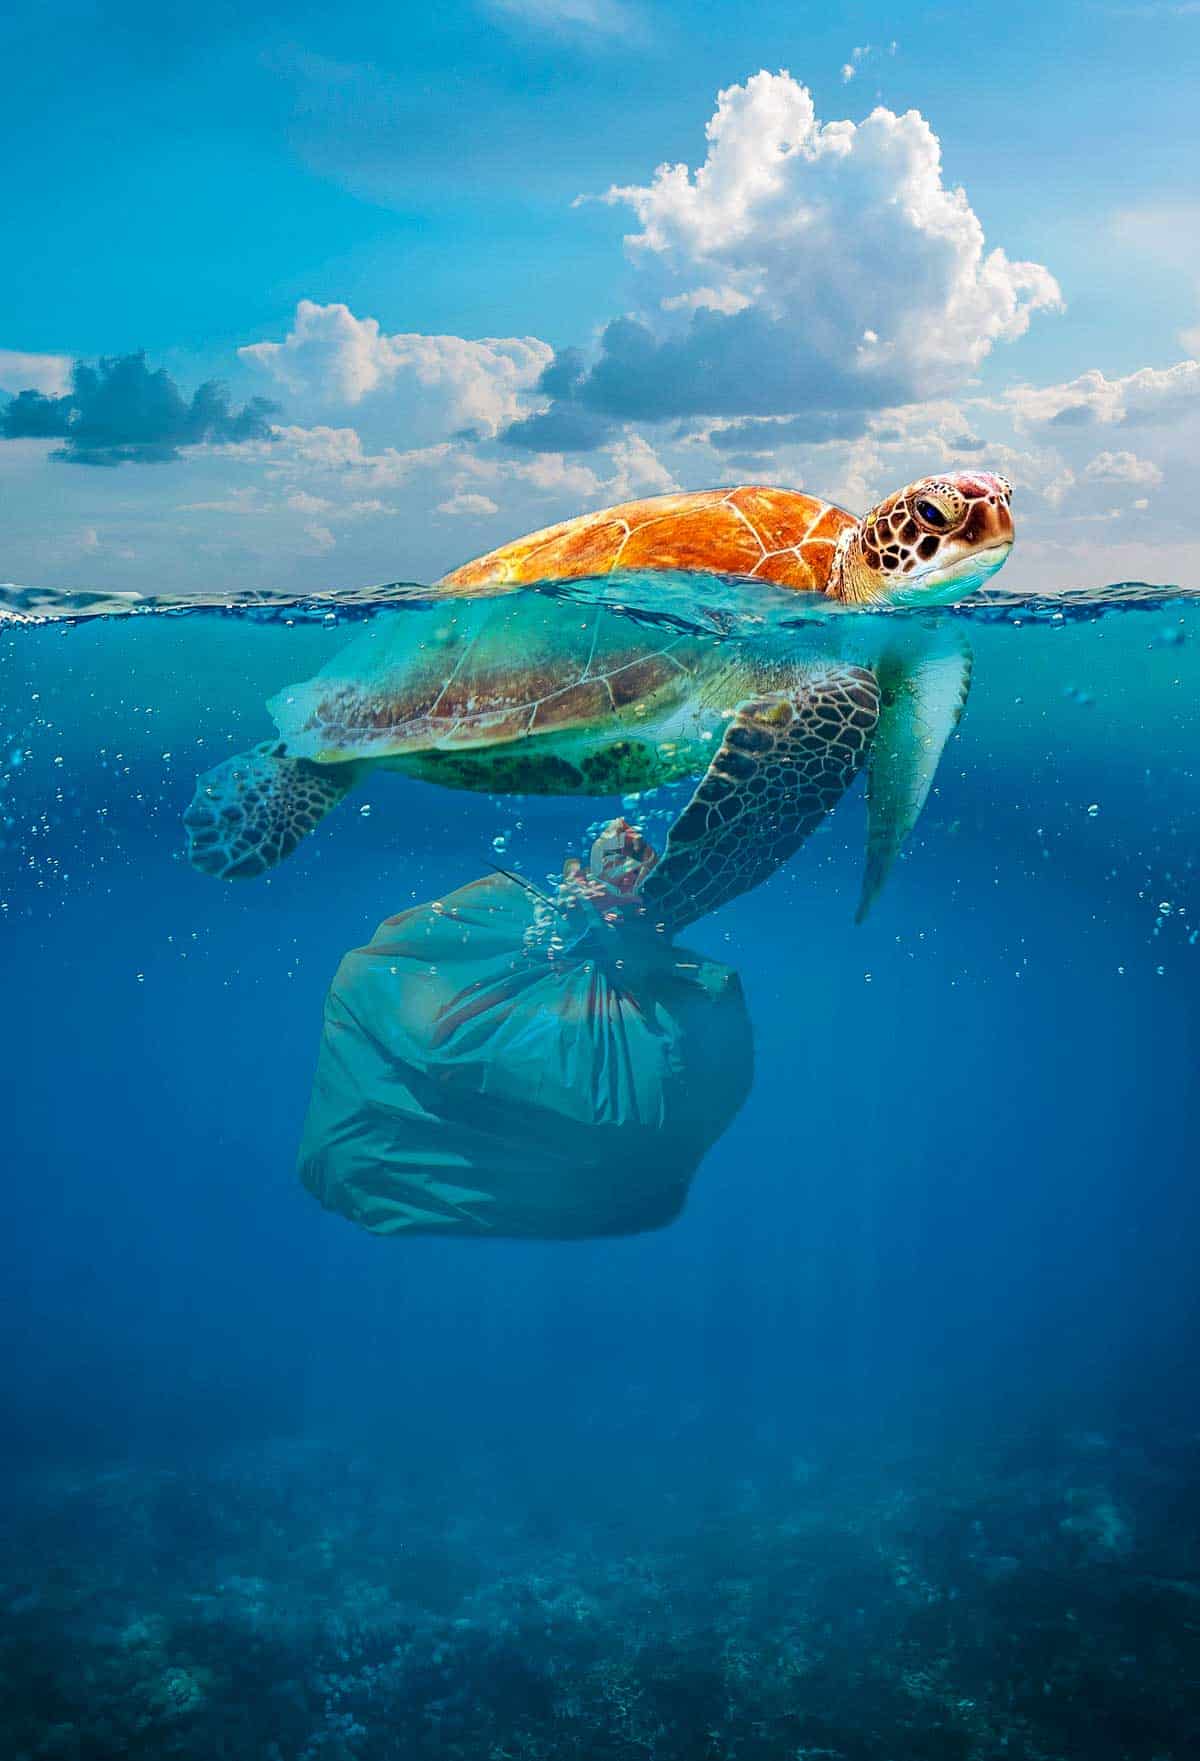 OCEAN PLASTICS: THE ECOLOGICAL DISASTER OF OUR TIME